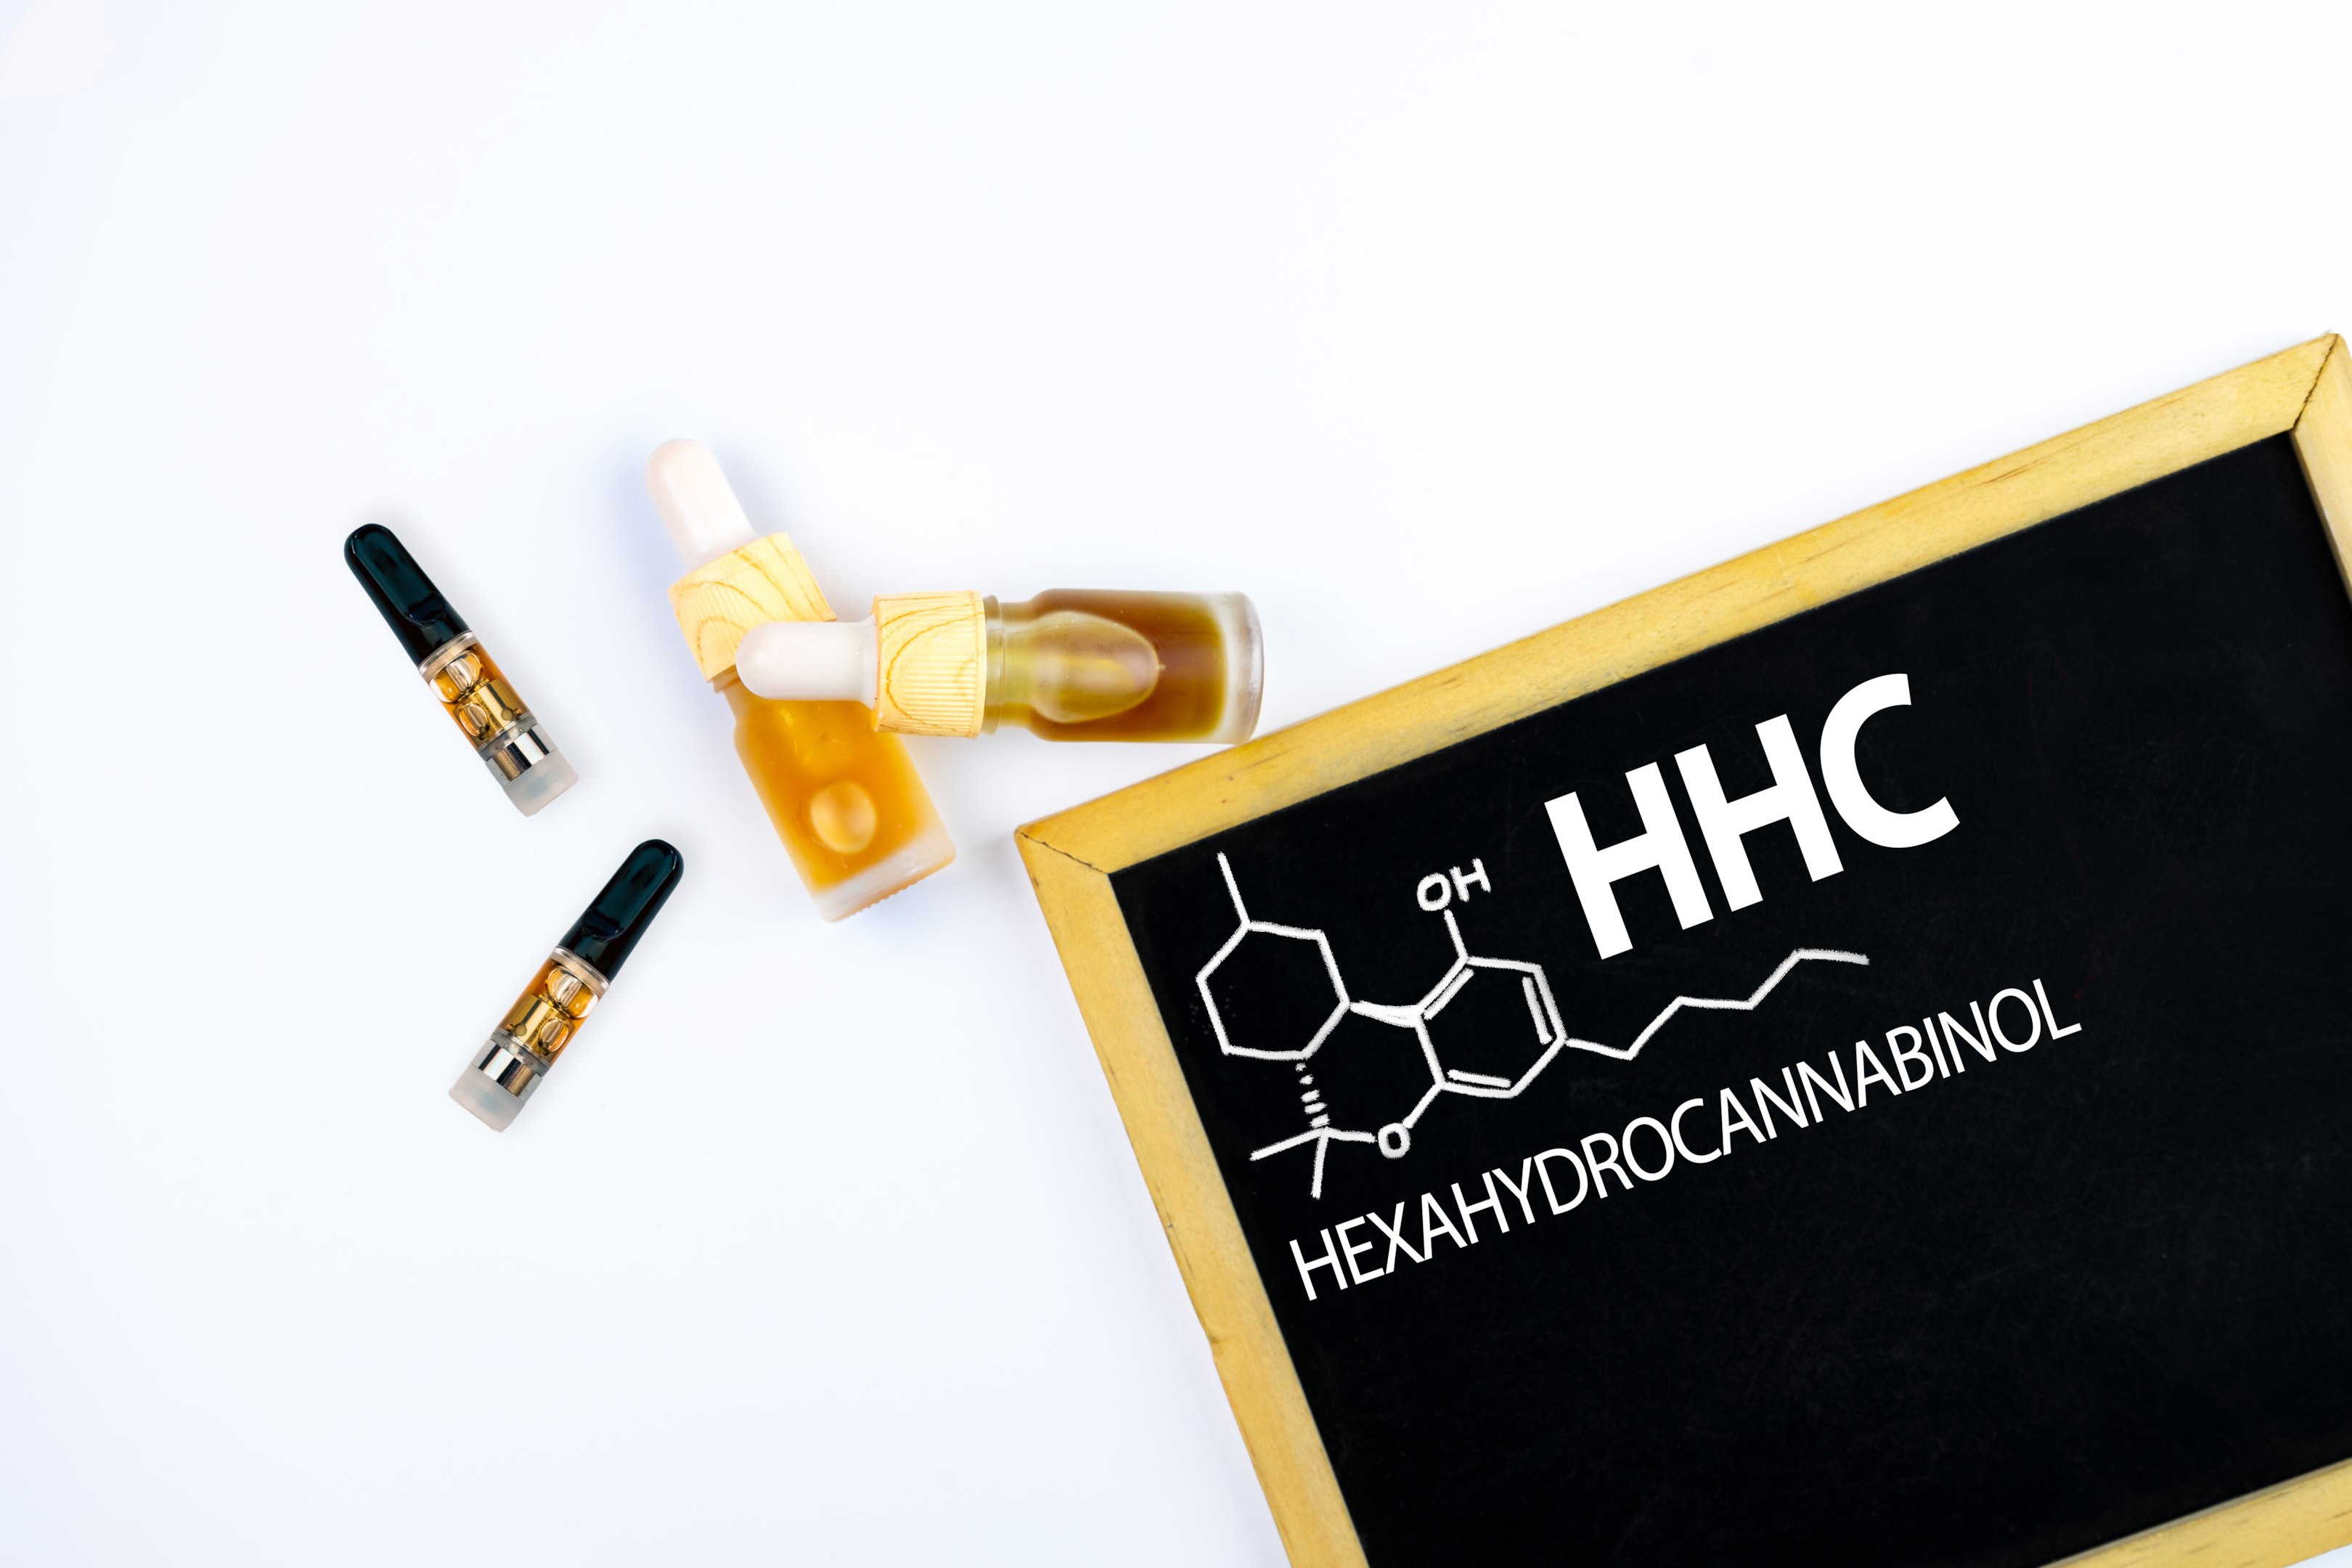 HHC is an ever-evolving cannabinoid that has been used in many products for many different reasons.